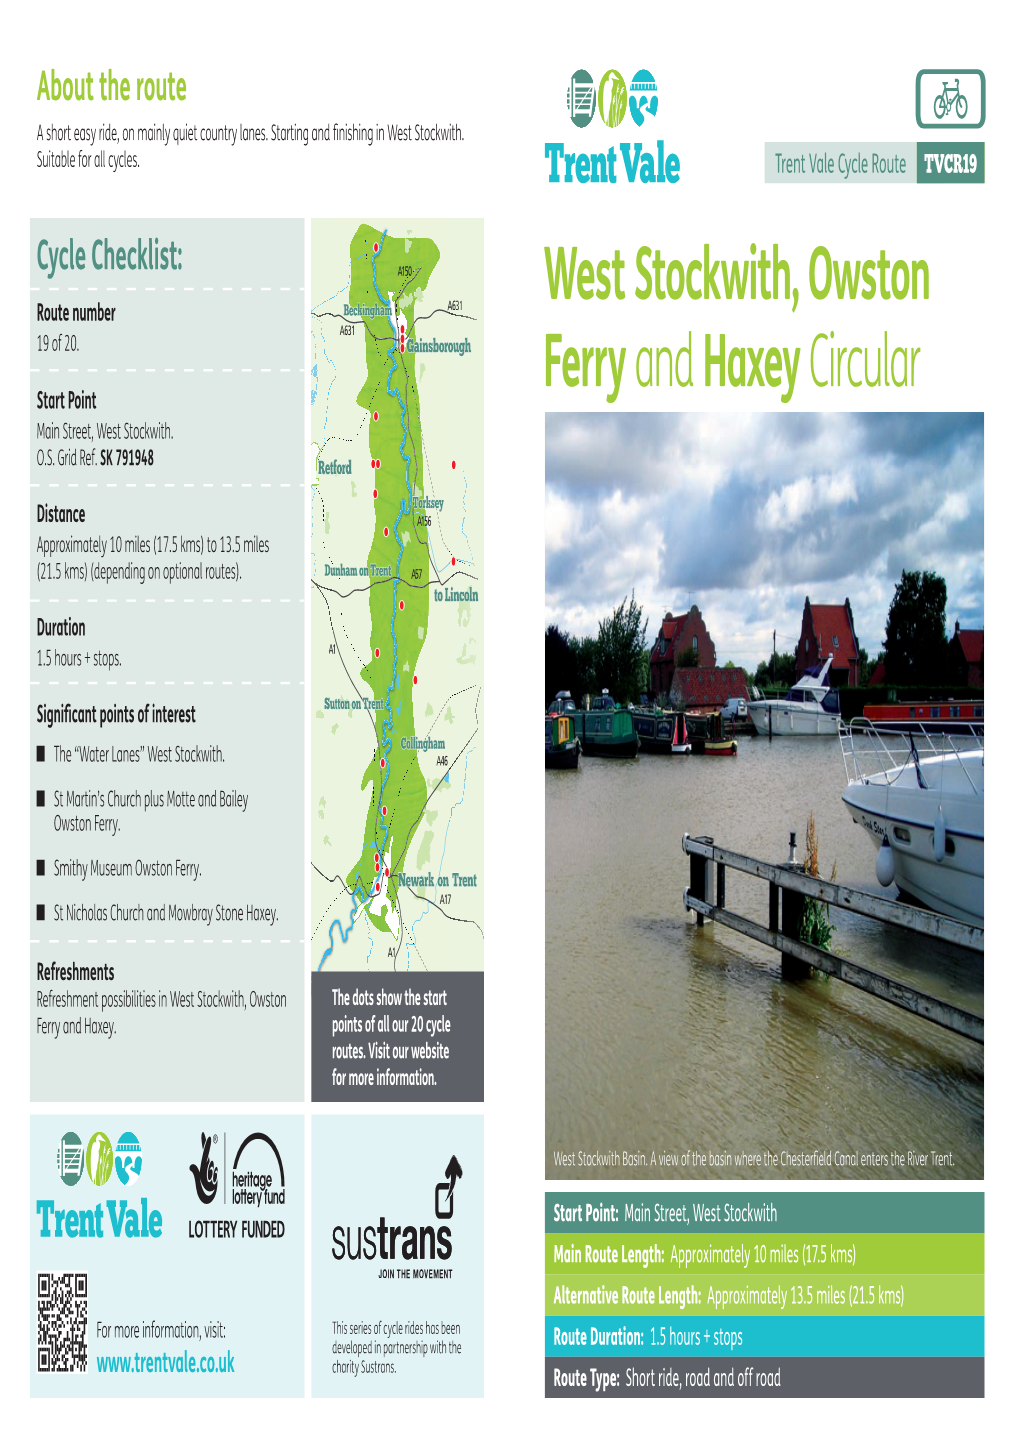 West Stockwith, Owston Ferry and Haxey Circular